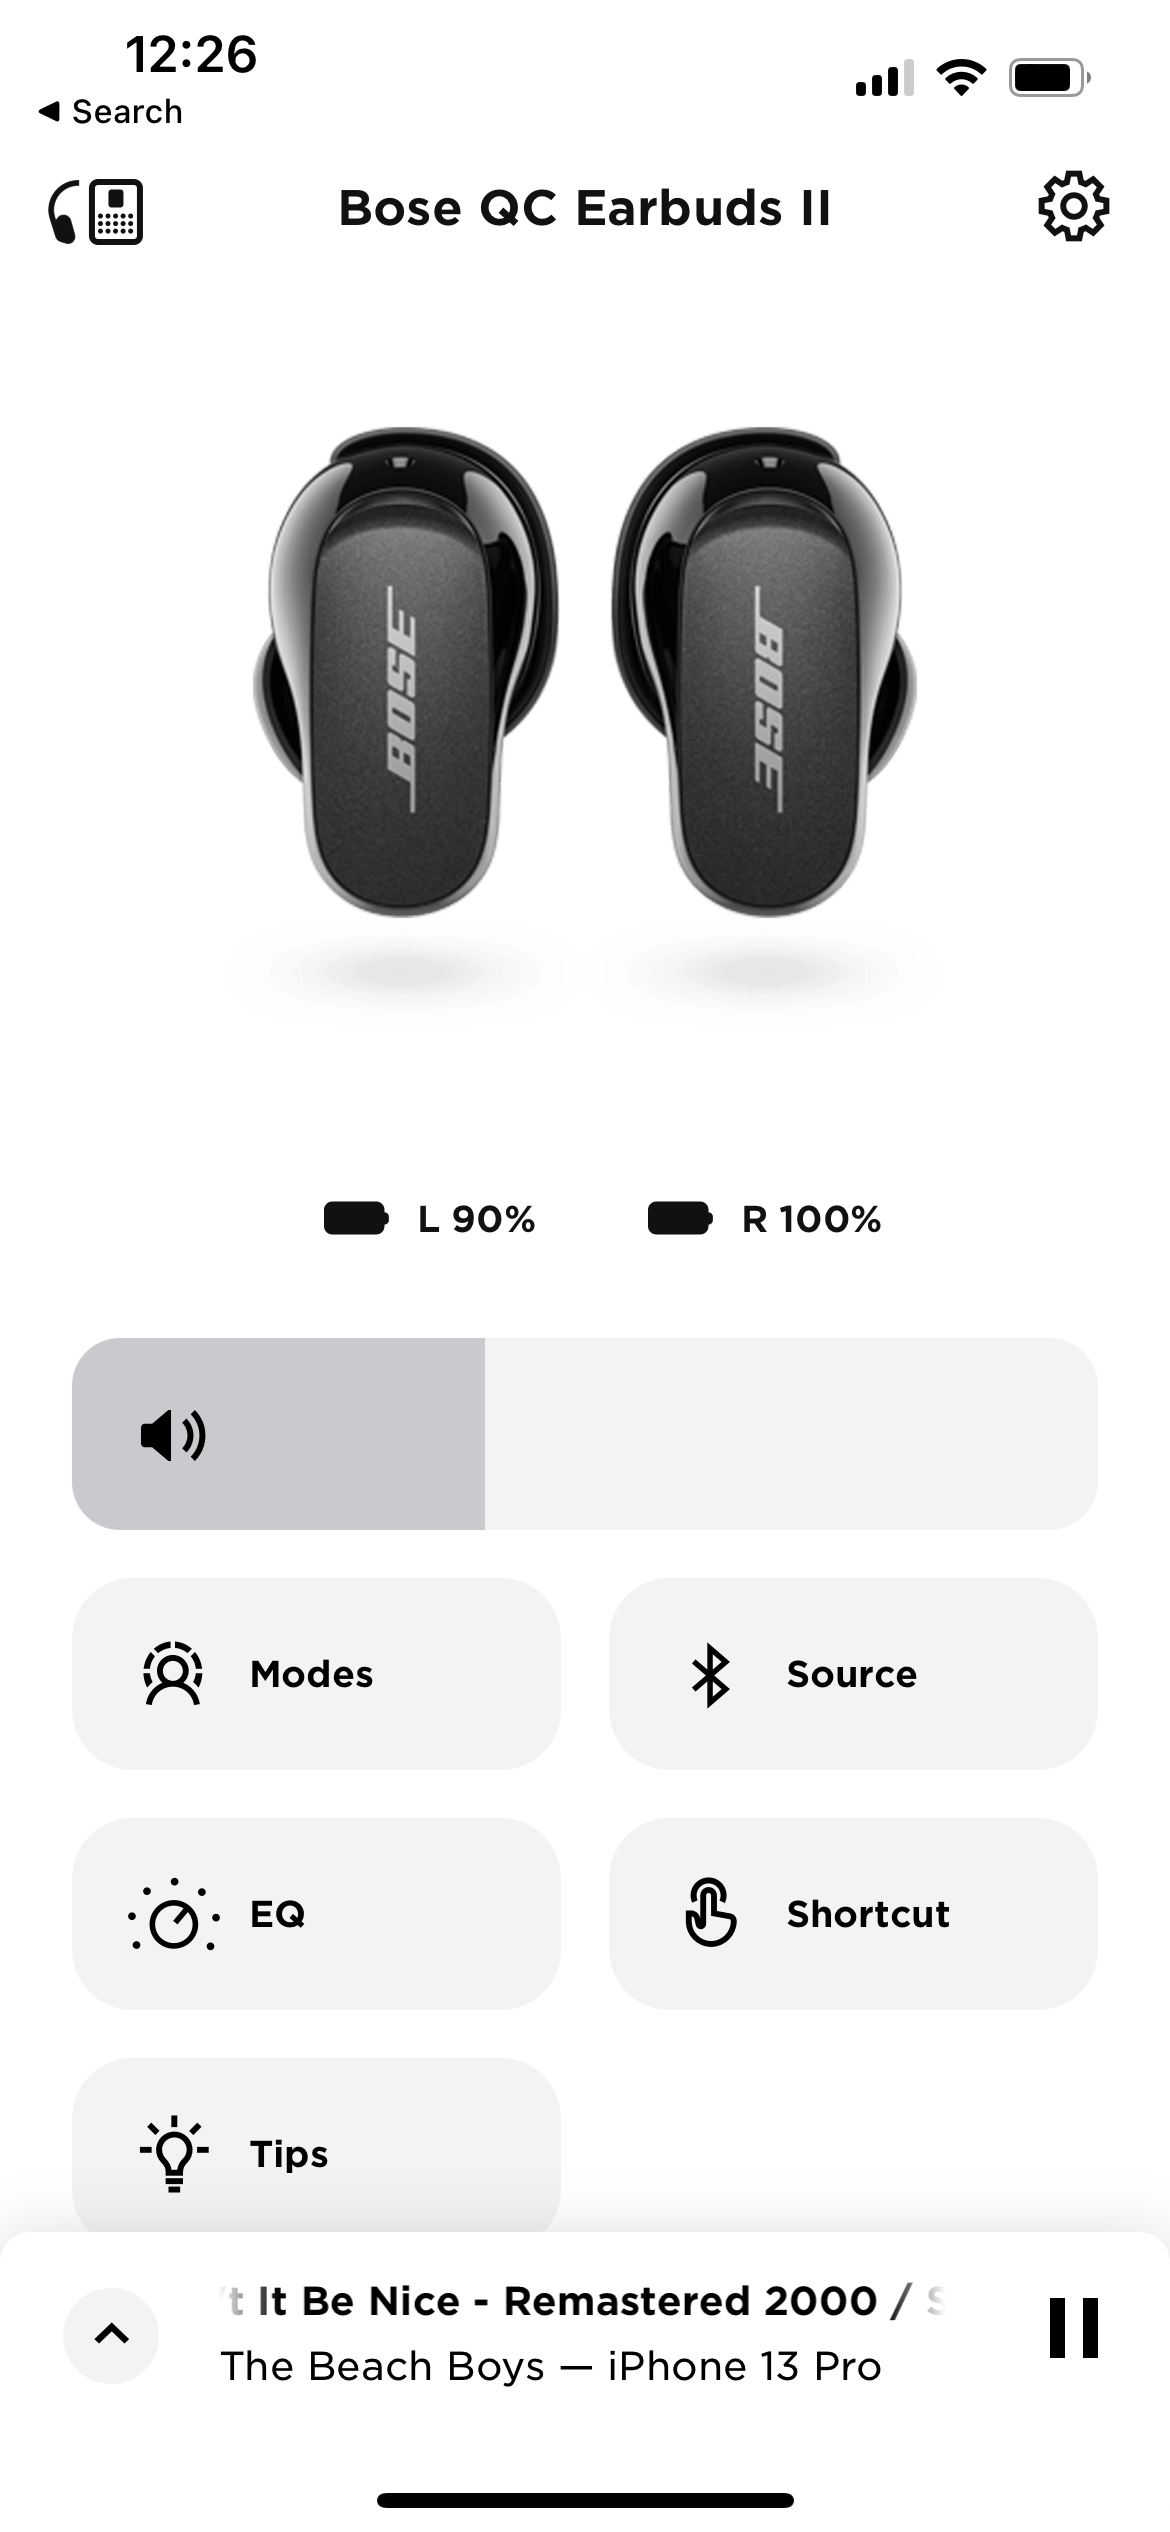 Bose QuietComfort 2 earbuds app main page